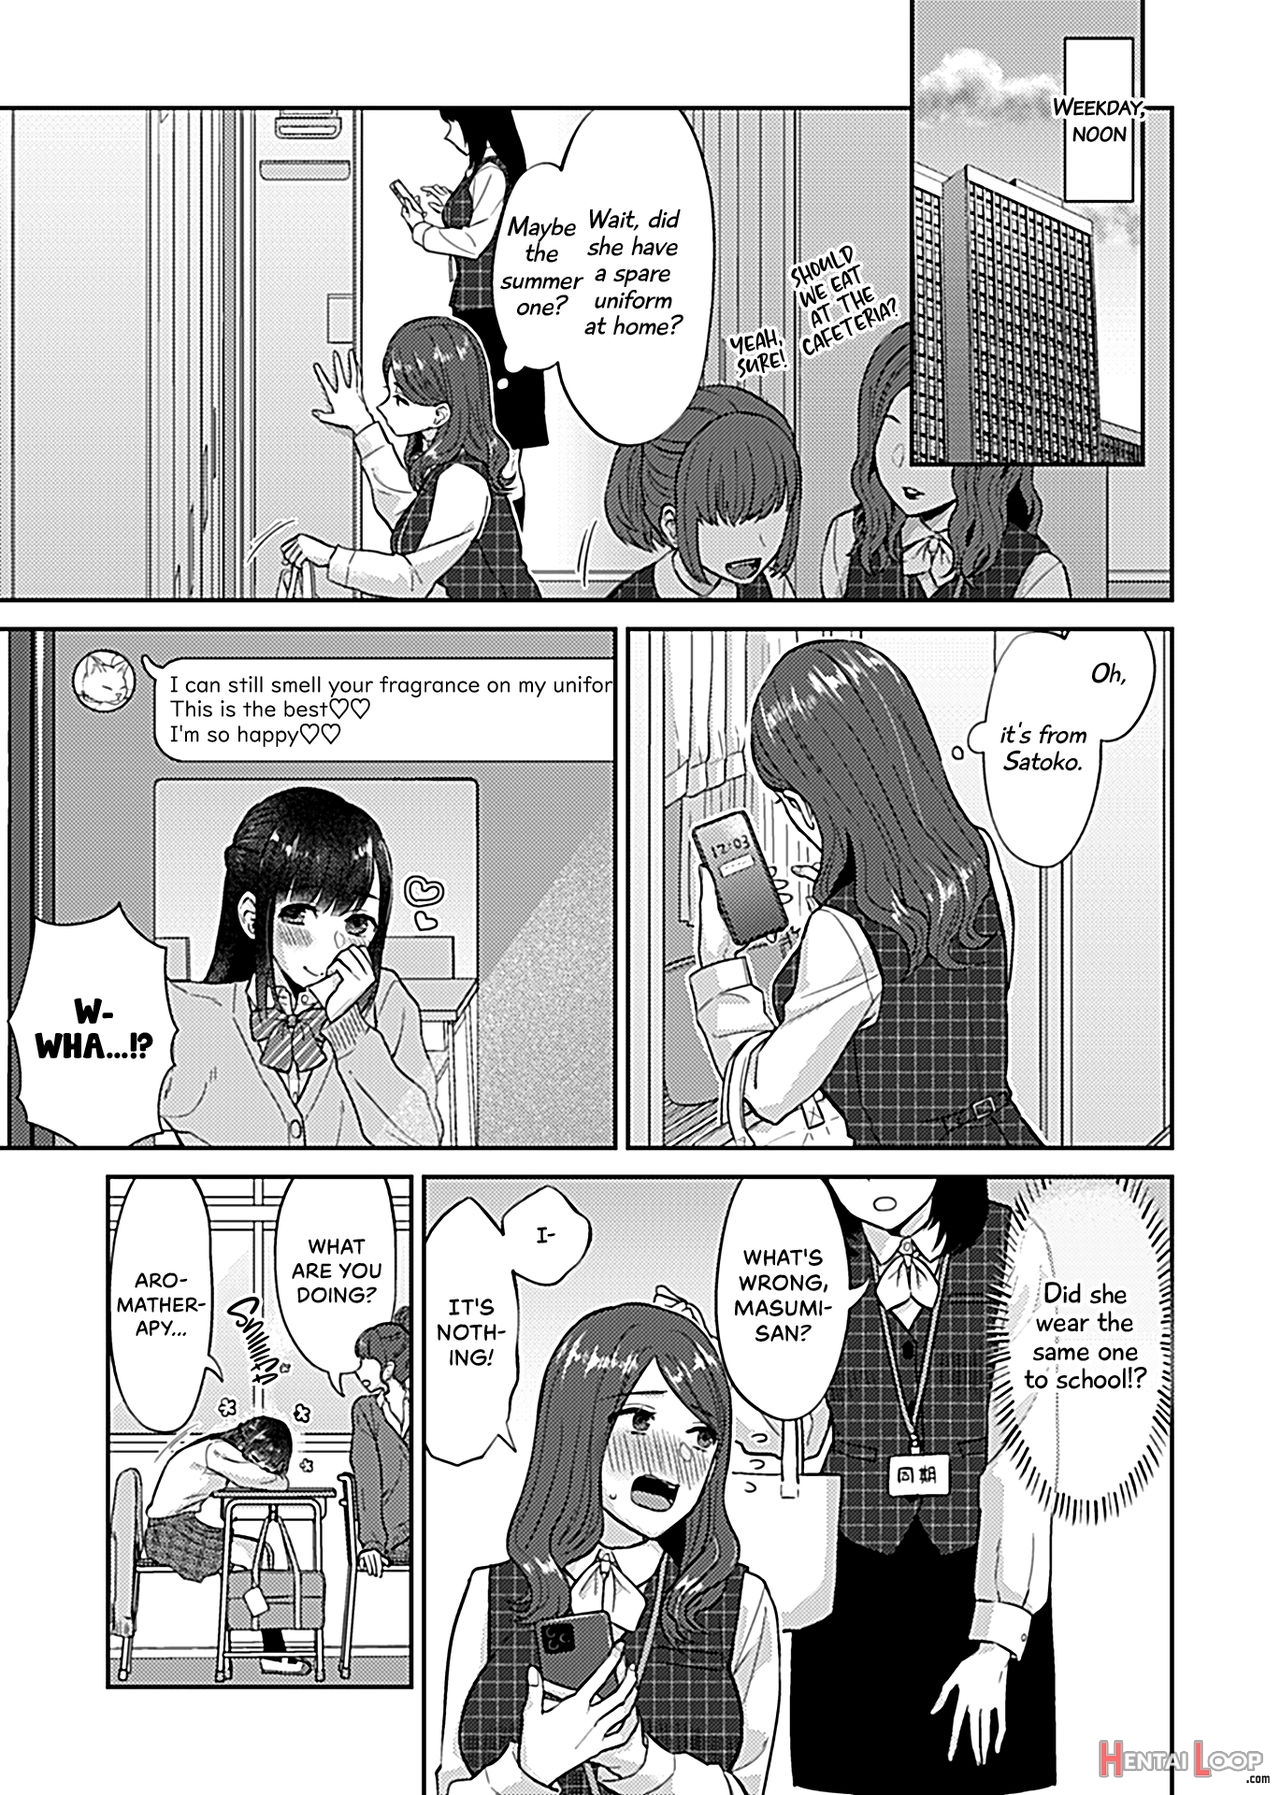 Lilies Are In Full Bloom - Volume 1 page 121